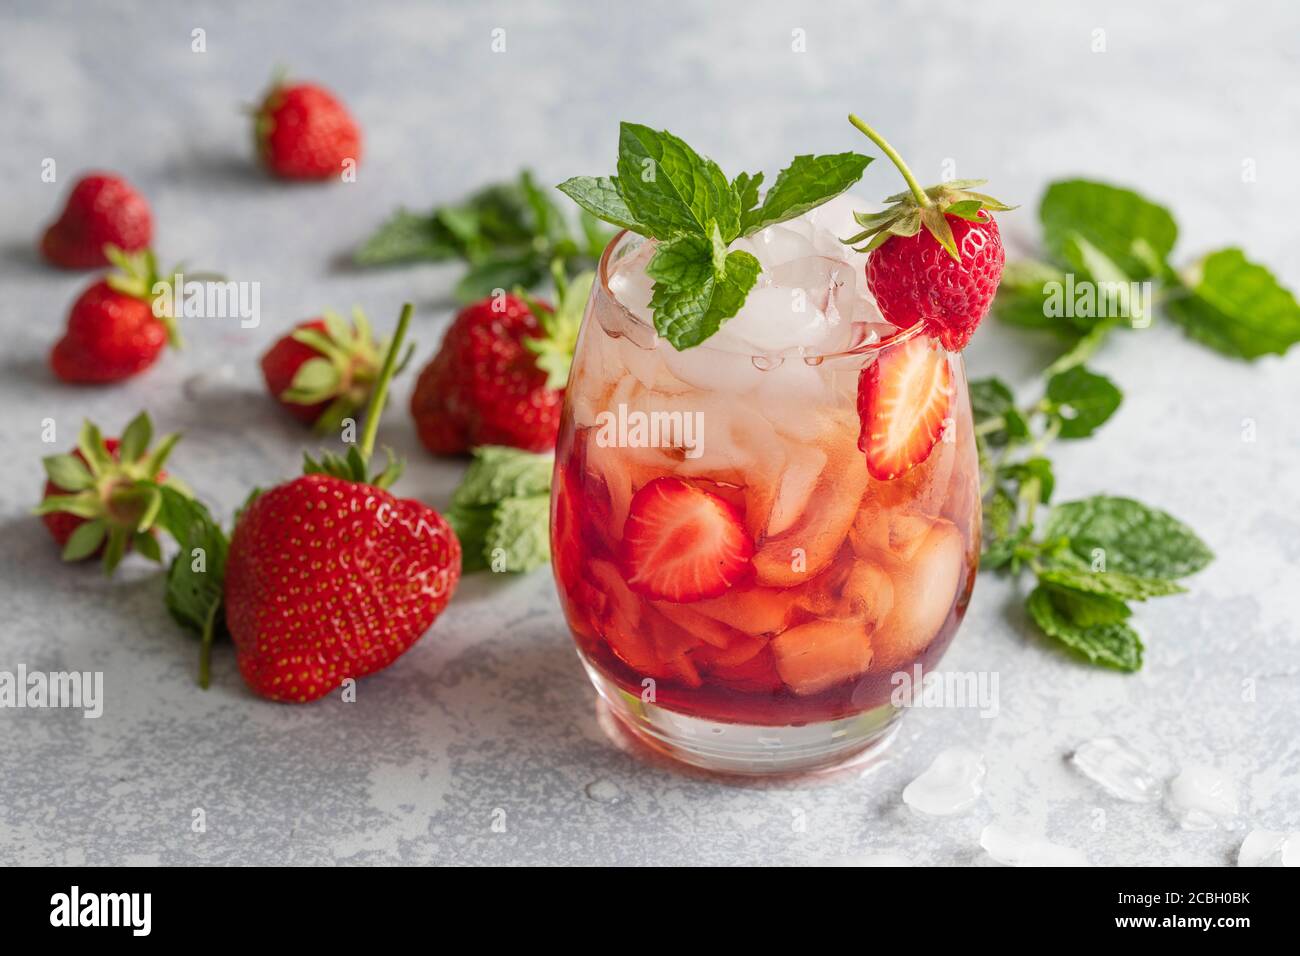 Strawberry drink mojito. Mocktail or cocktail with strawberries and mint leafs. The refreshing red drink is on a gray background with copy space on to Stock Photo